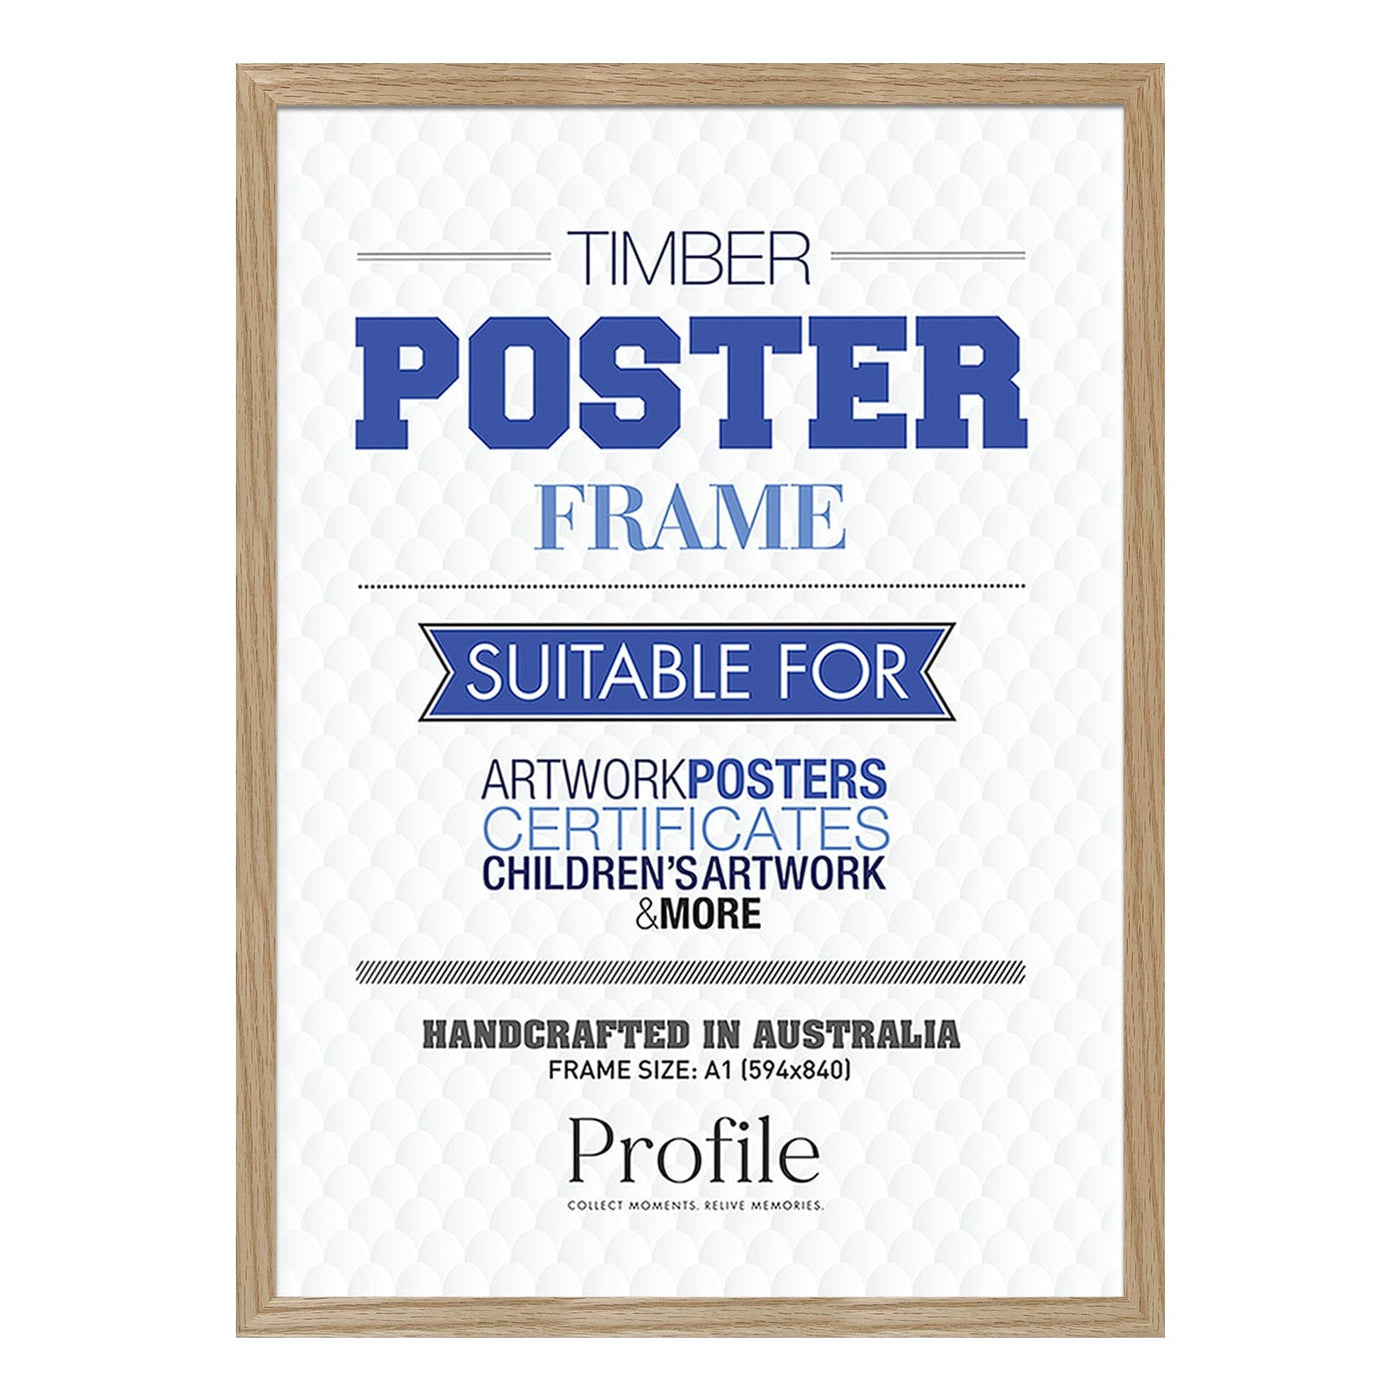 Classic Natural Oak A1 Picture Frame from our Australian Made A1 Picture Frames collection by Profile Products Australia